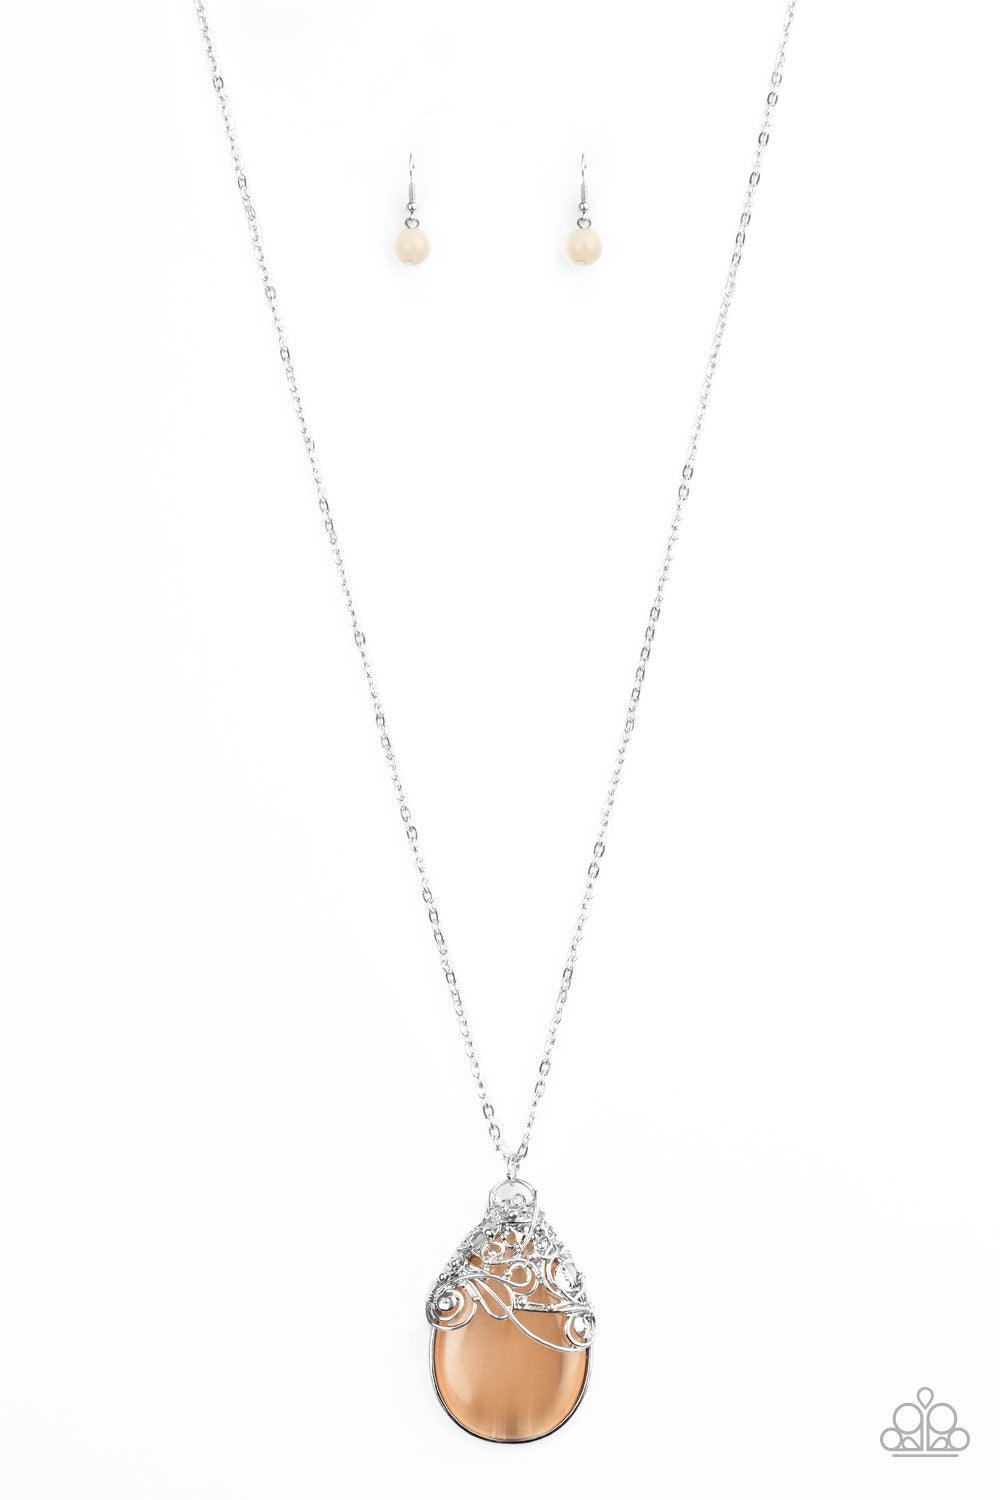 Paparazzi Accessories Tangled Gardens - Orange A collection of whimsically twisted wire delicately overlaps across the top of an oversized orange cat's eye teardrop stone, creating an ethereal pendant at the bottom of a lengthened silver chain. Features a